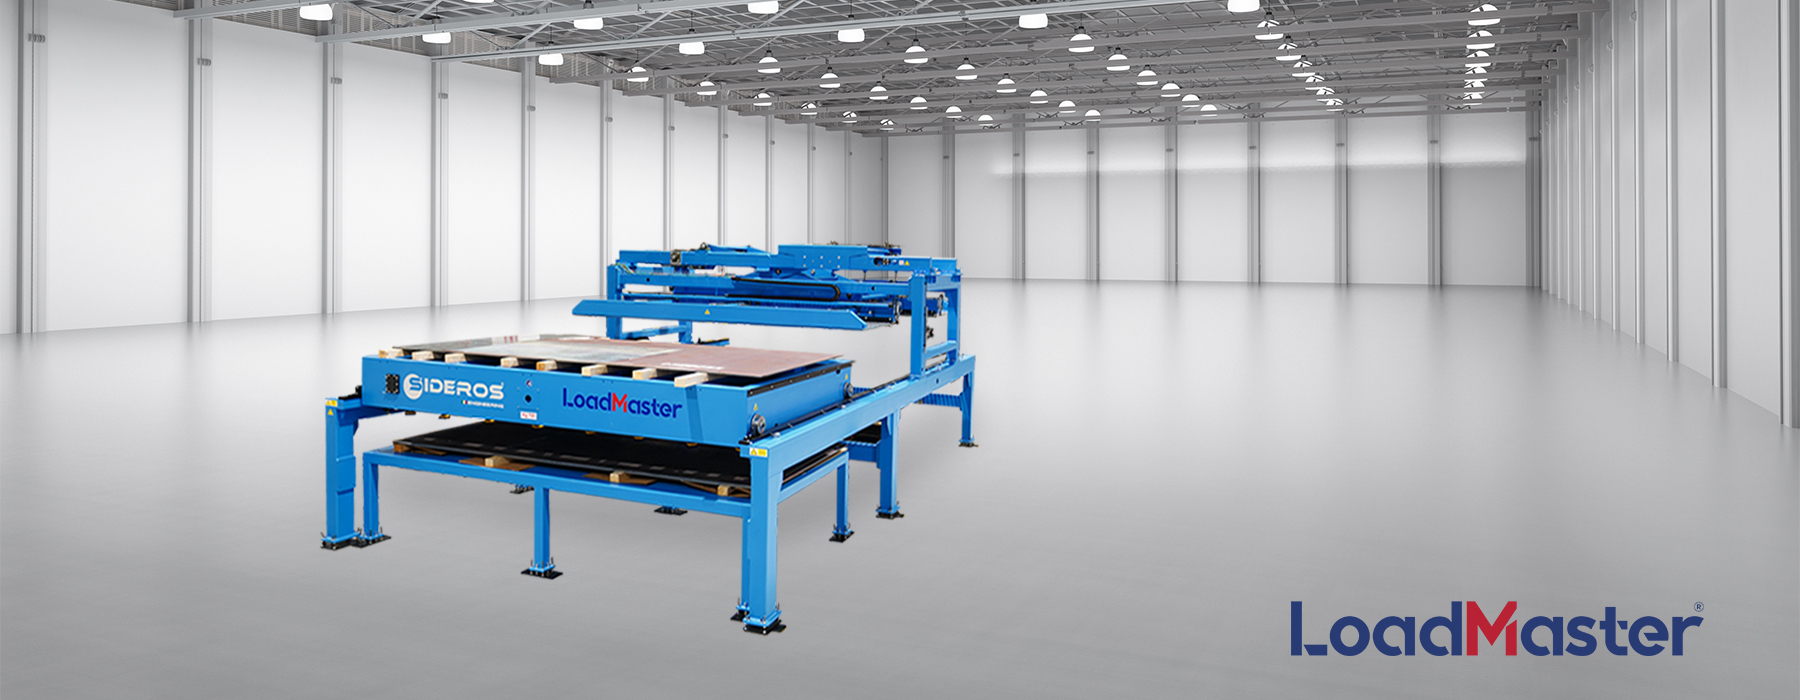 min loadmaster | Automated Load and Unload System for sheet metal